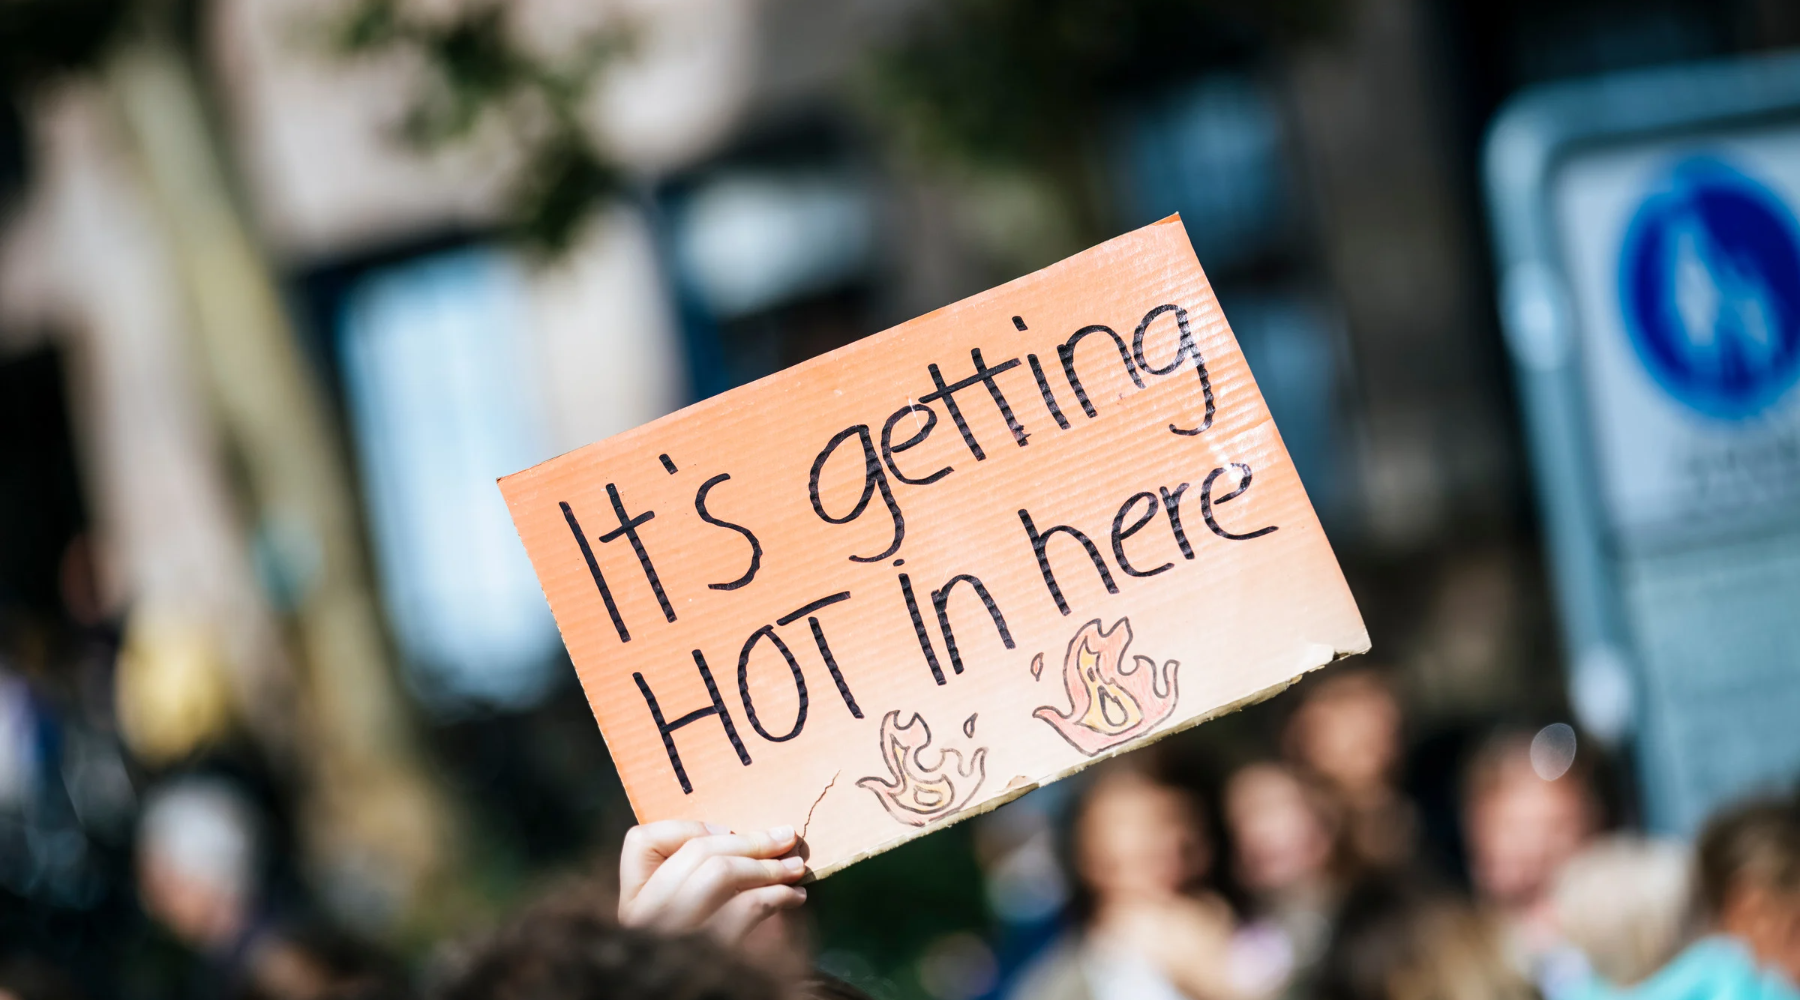 Close-up of a protest sign that says "it's getting hot in here"